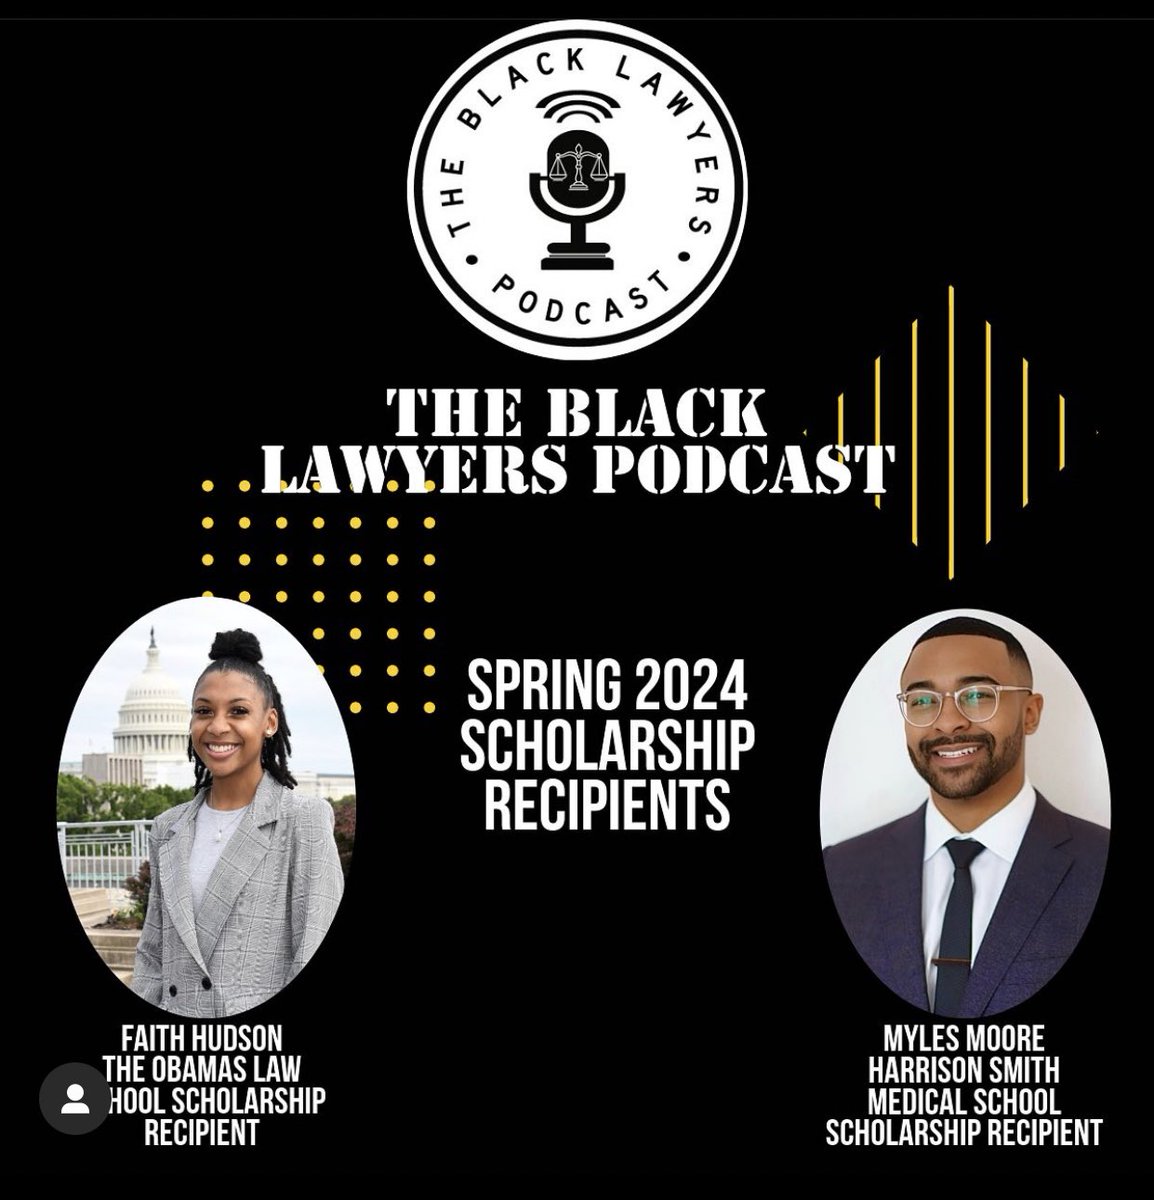 Honored to receive the Harrison Smith Medical School Scholarship from @theblacklawyers ! Words can’t describe how grateful I am to accept this award! Thank you!